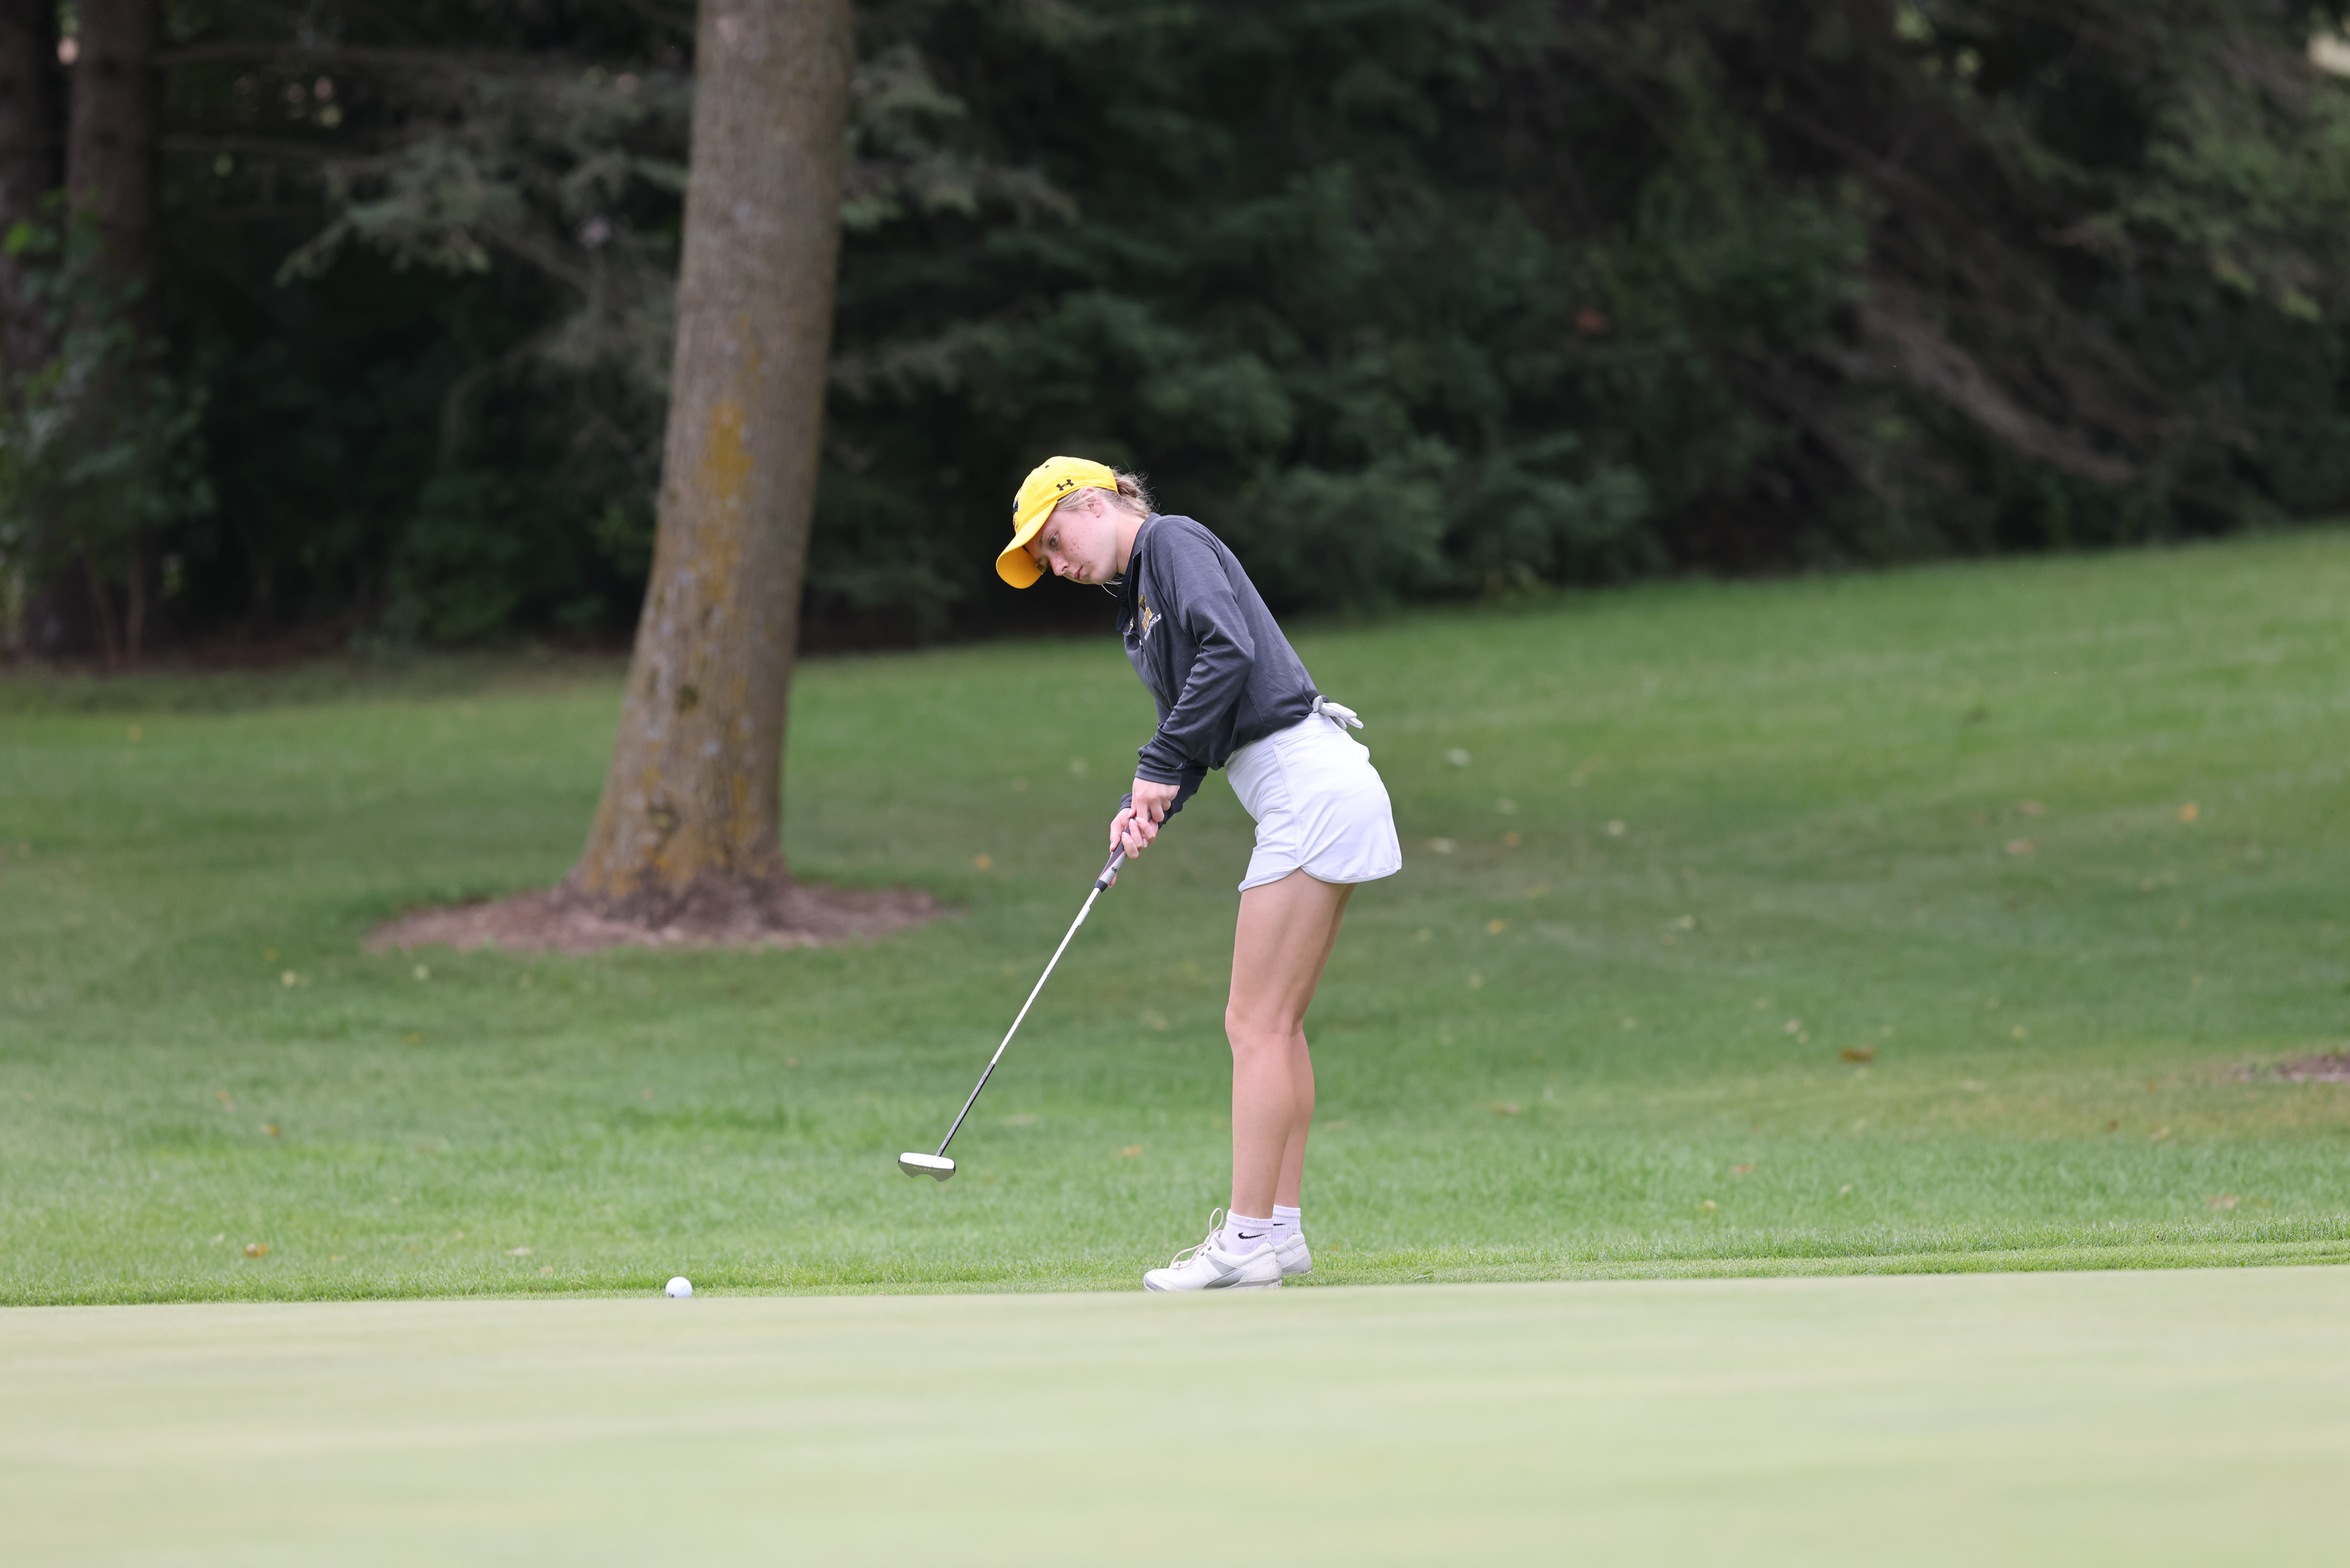 Kylie Herrin tied for 11th at the Marian University Invitational.